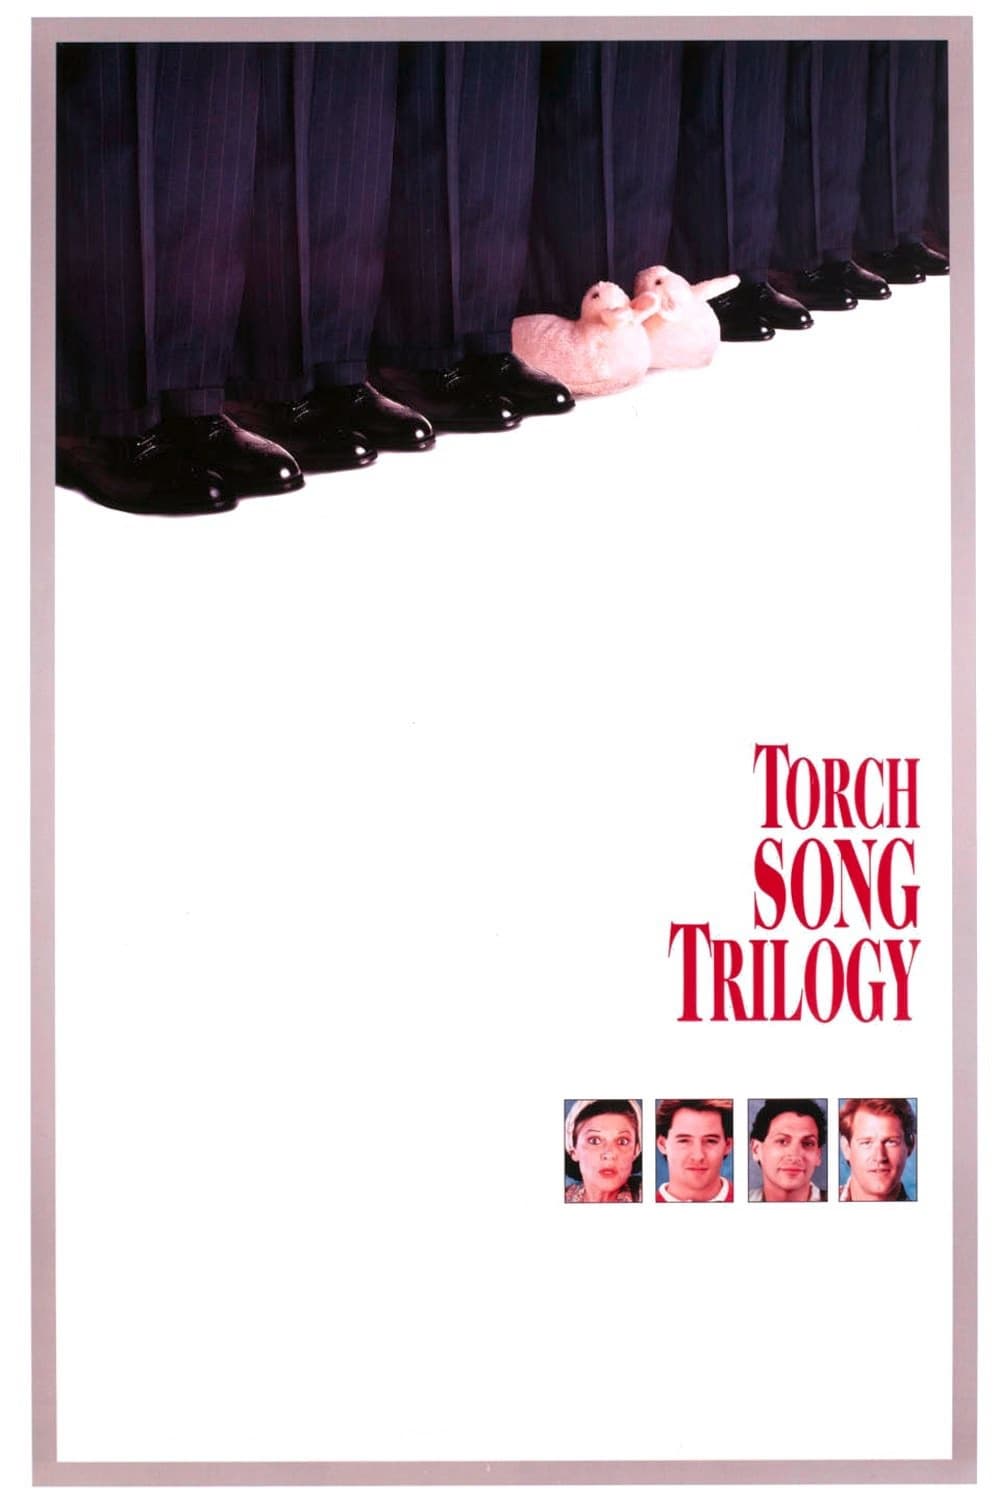 Torch song trilogy streaming